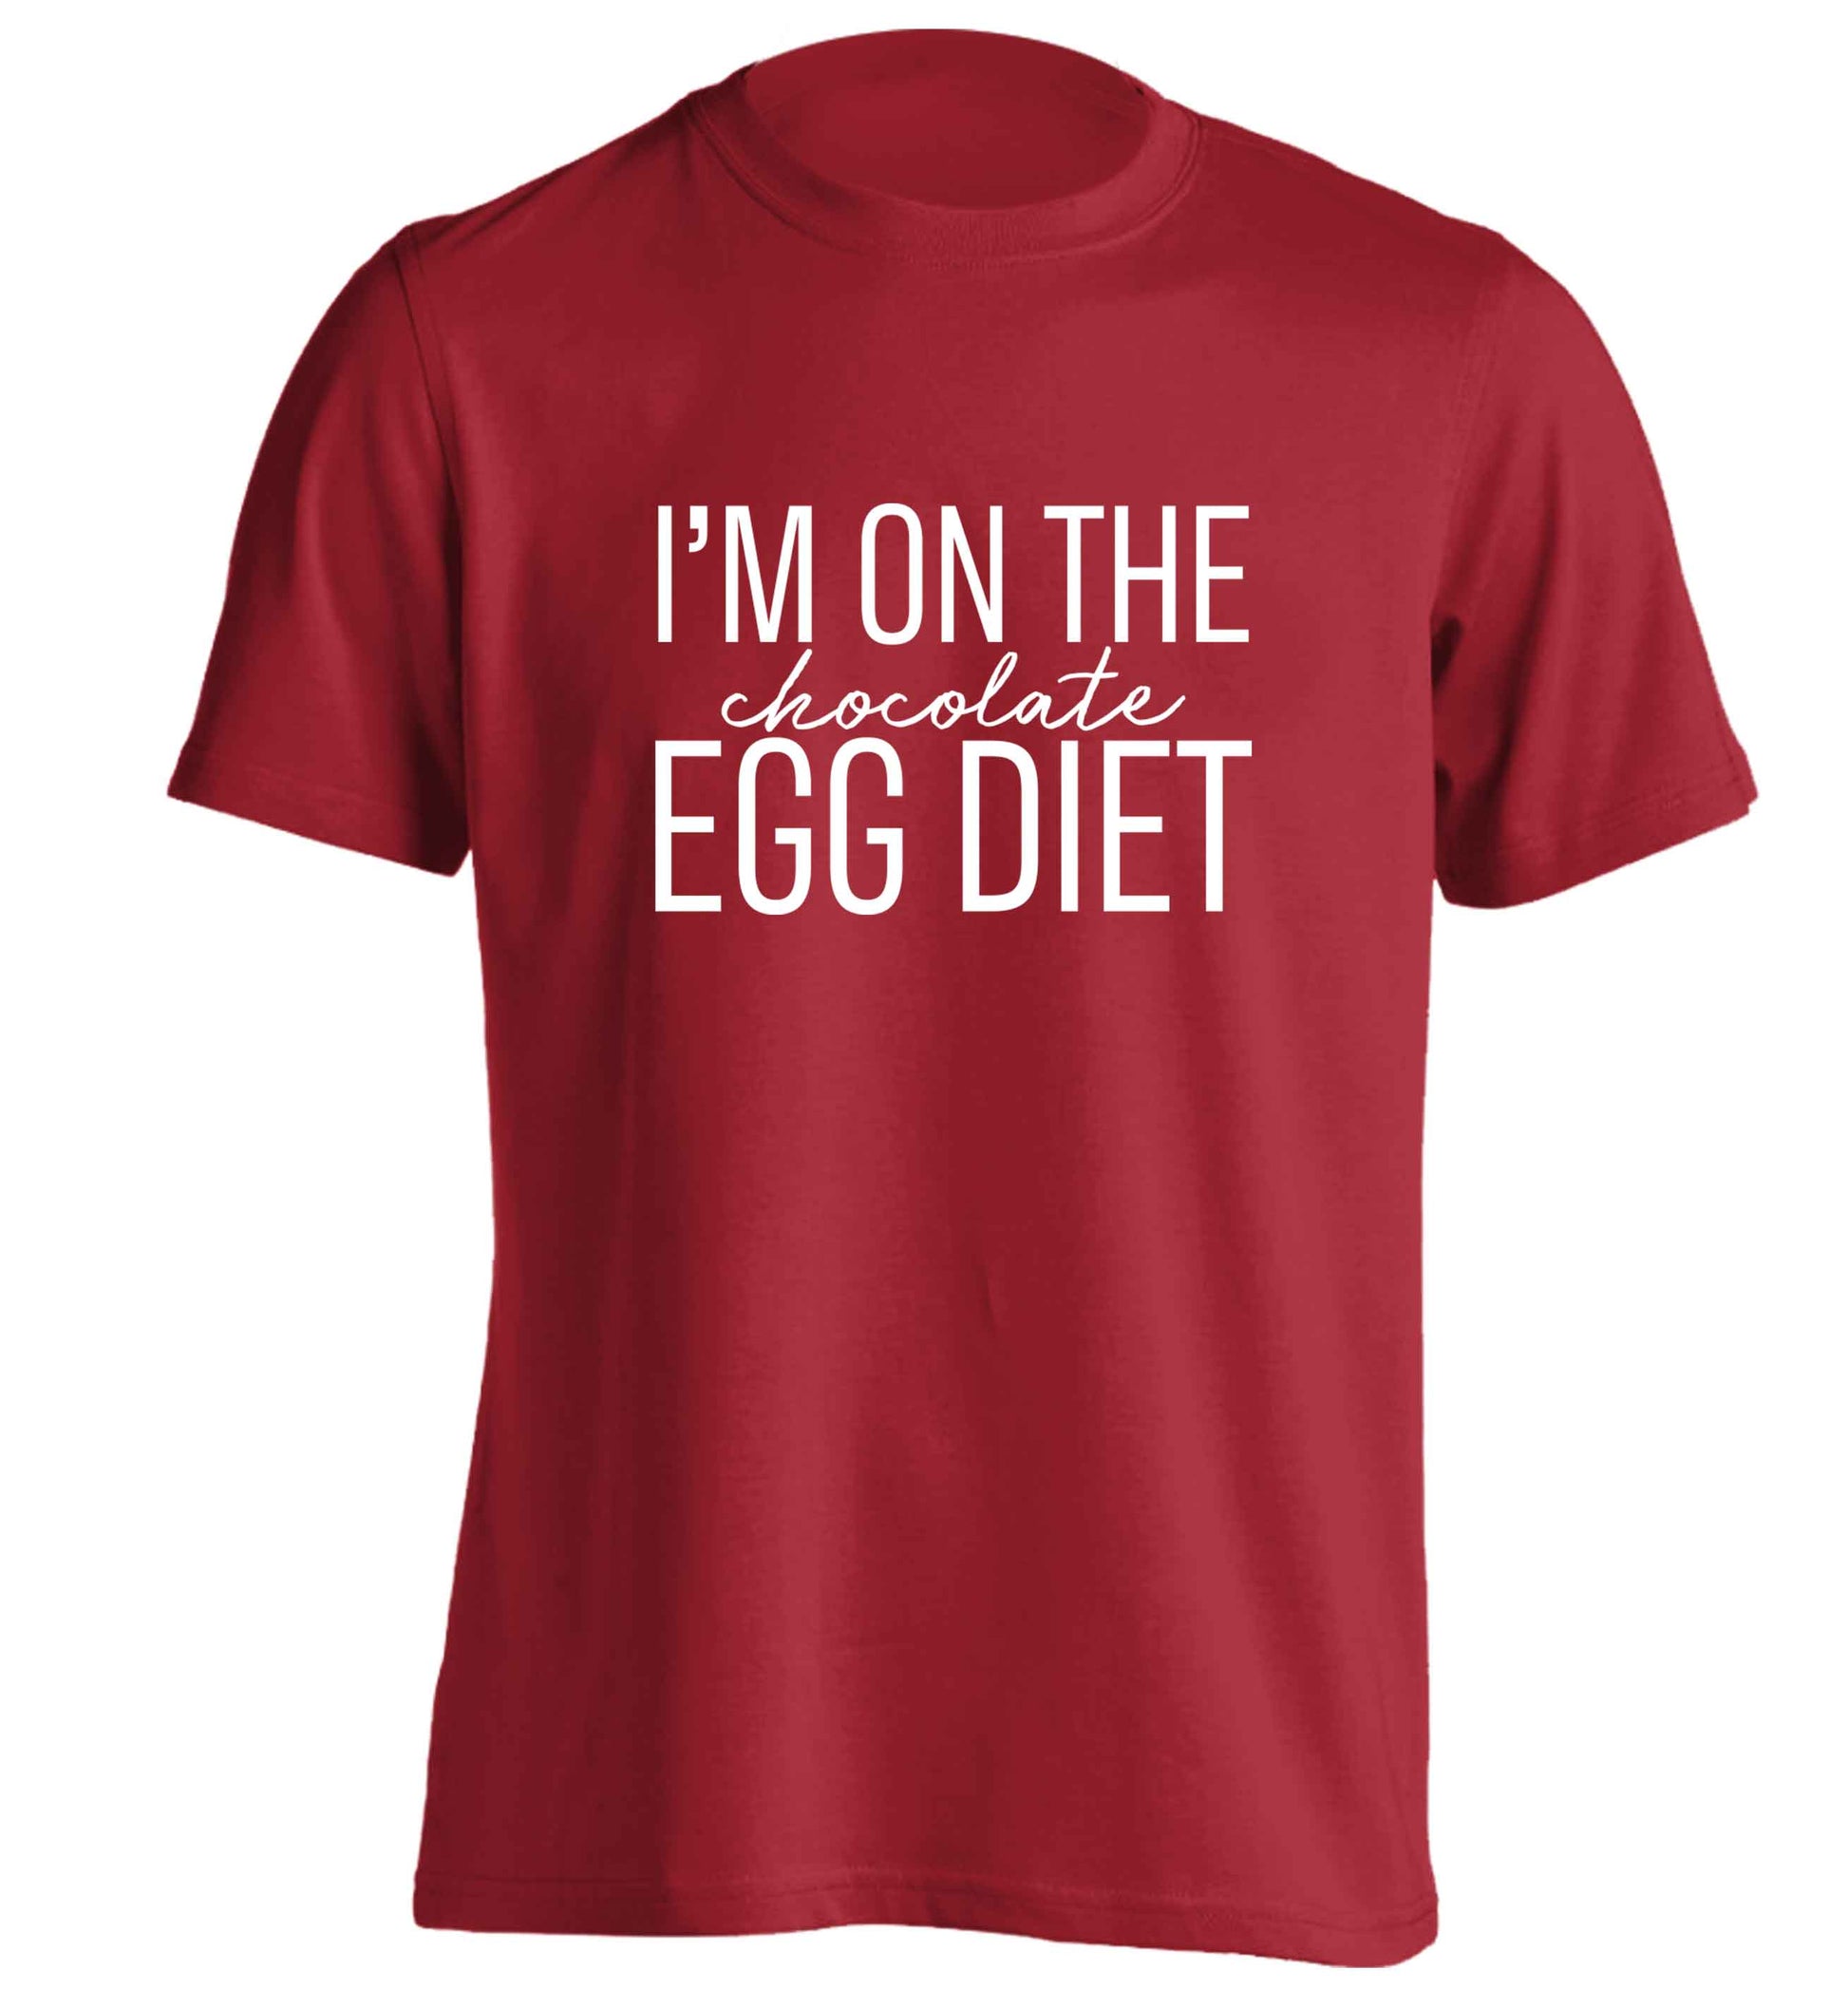 I'm on the chocolate egg diet adults unisex red Tshirt 2XL